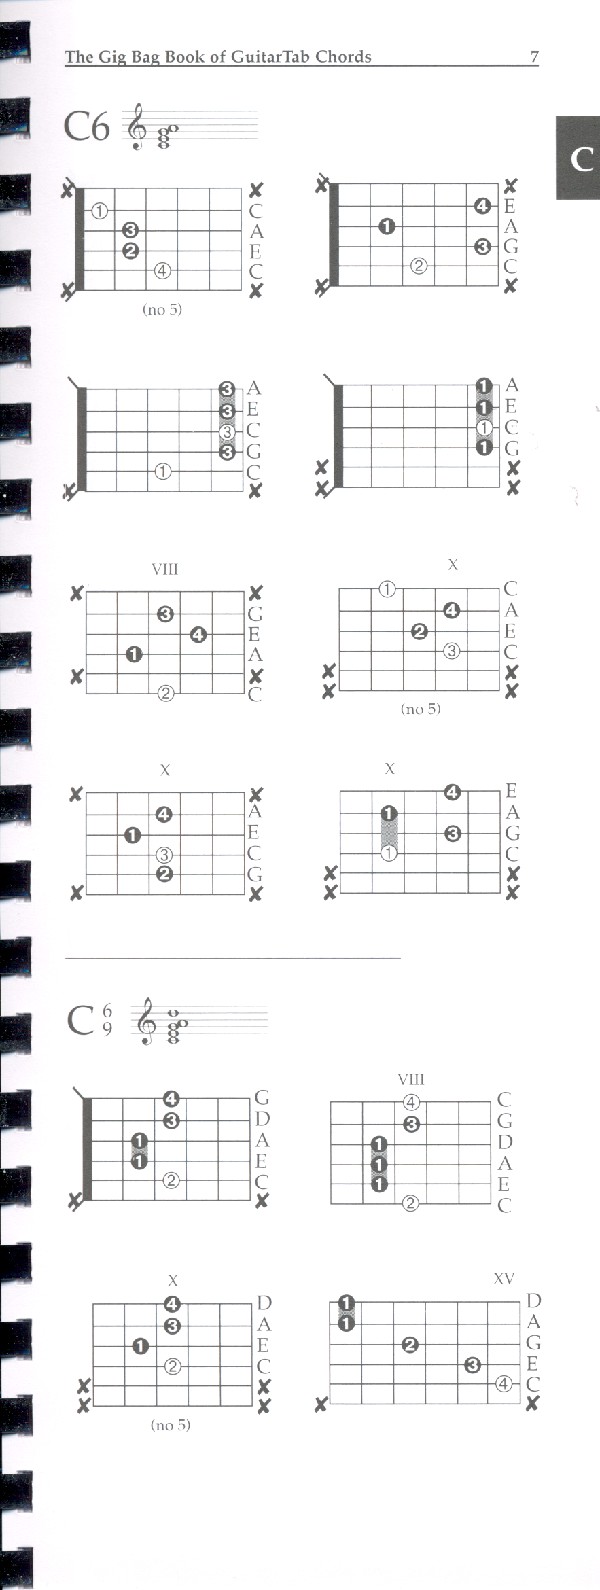 The gig bag book of guitar tab chords over 2100 chords